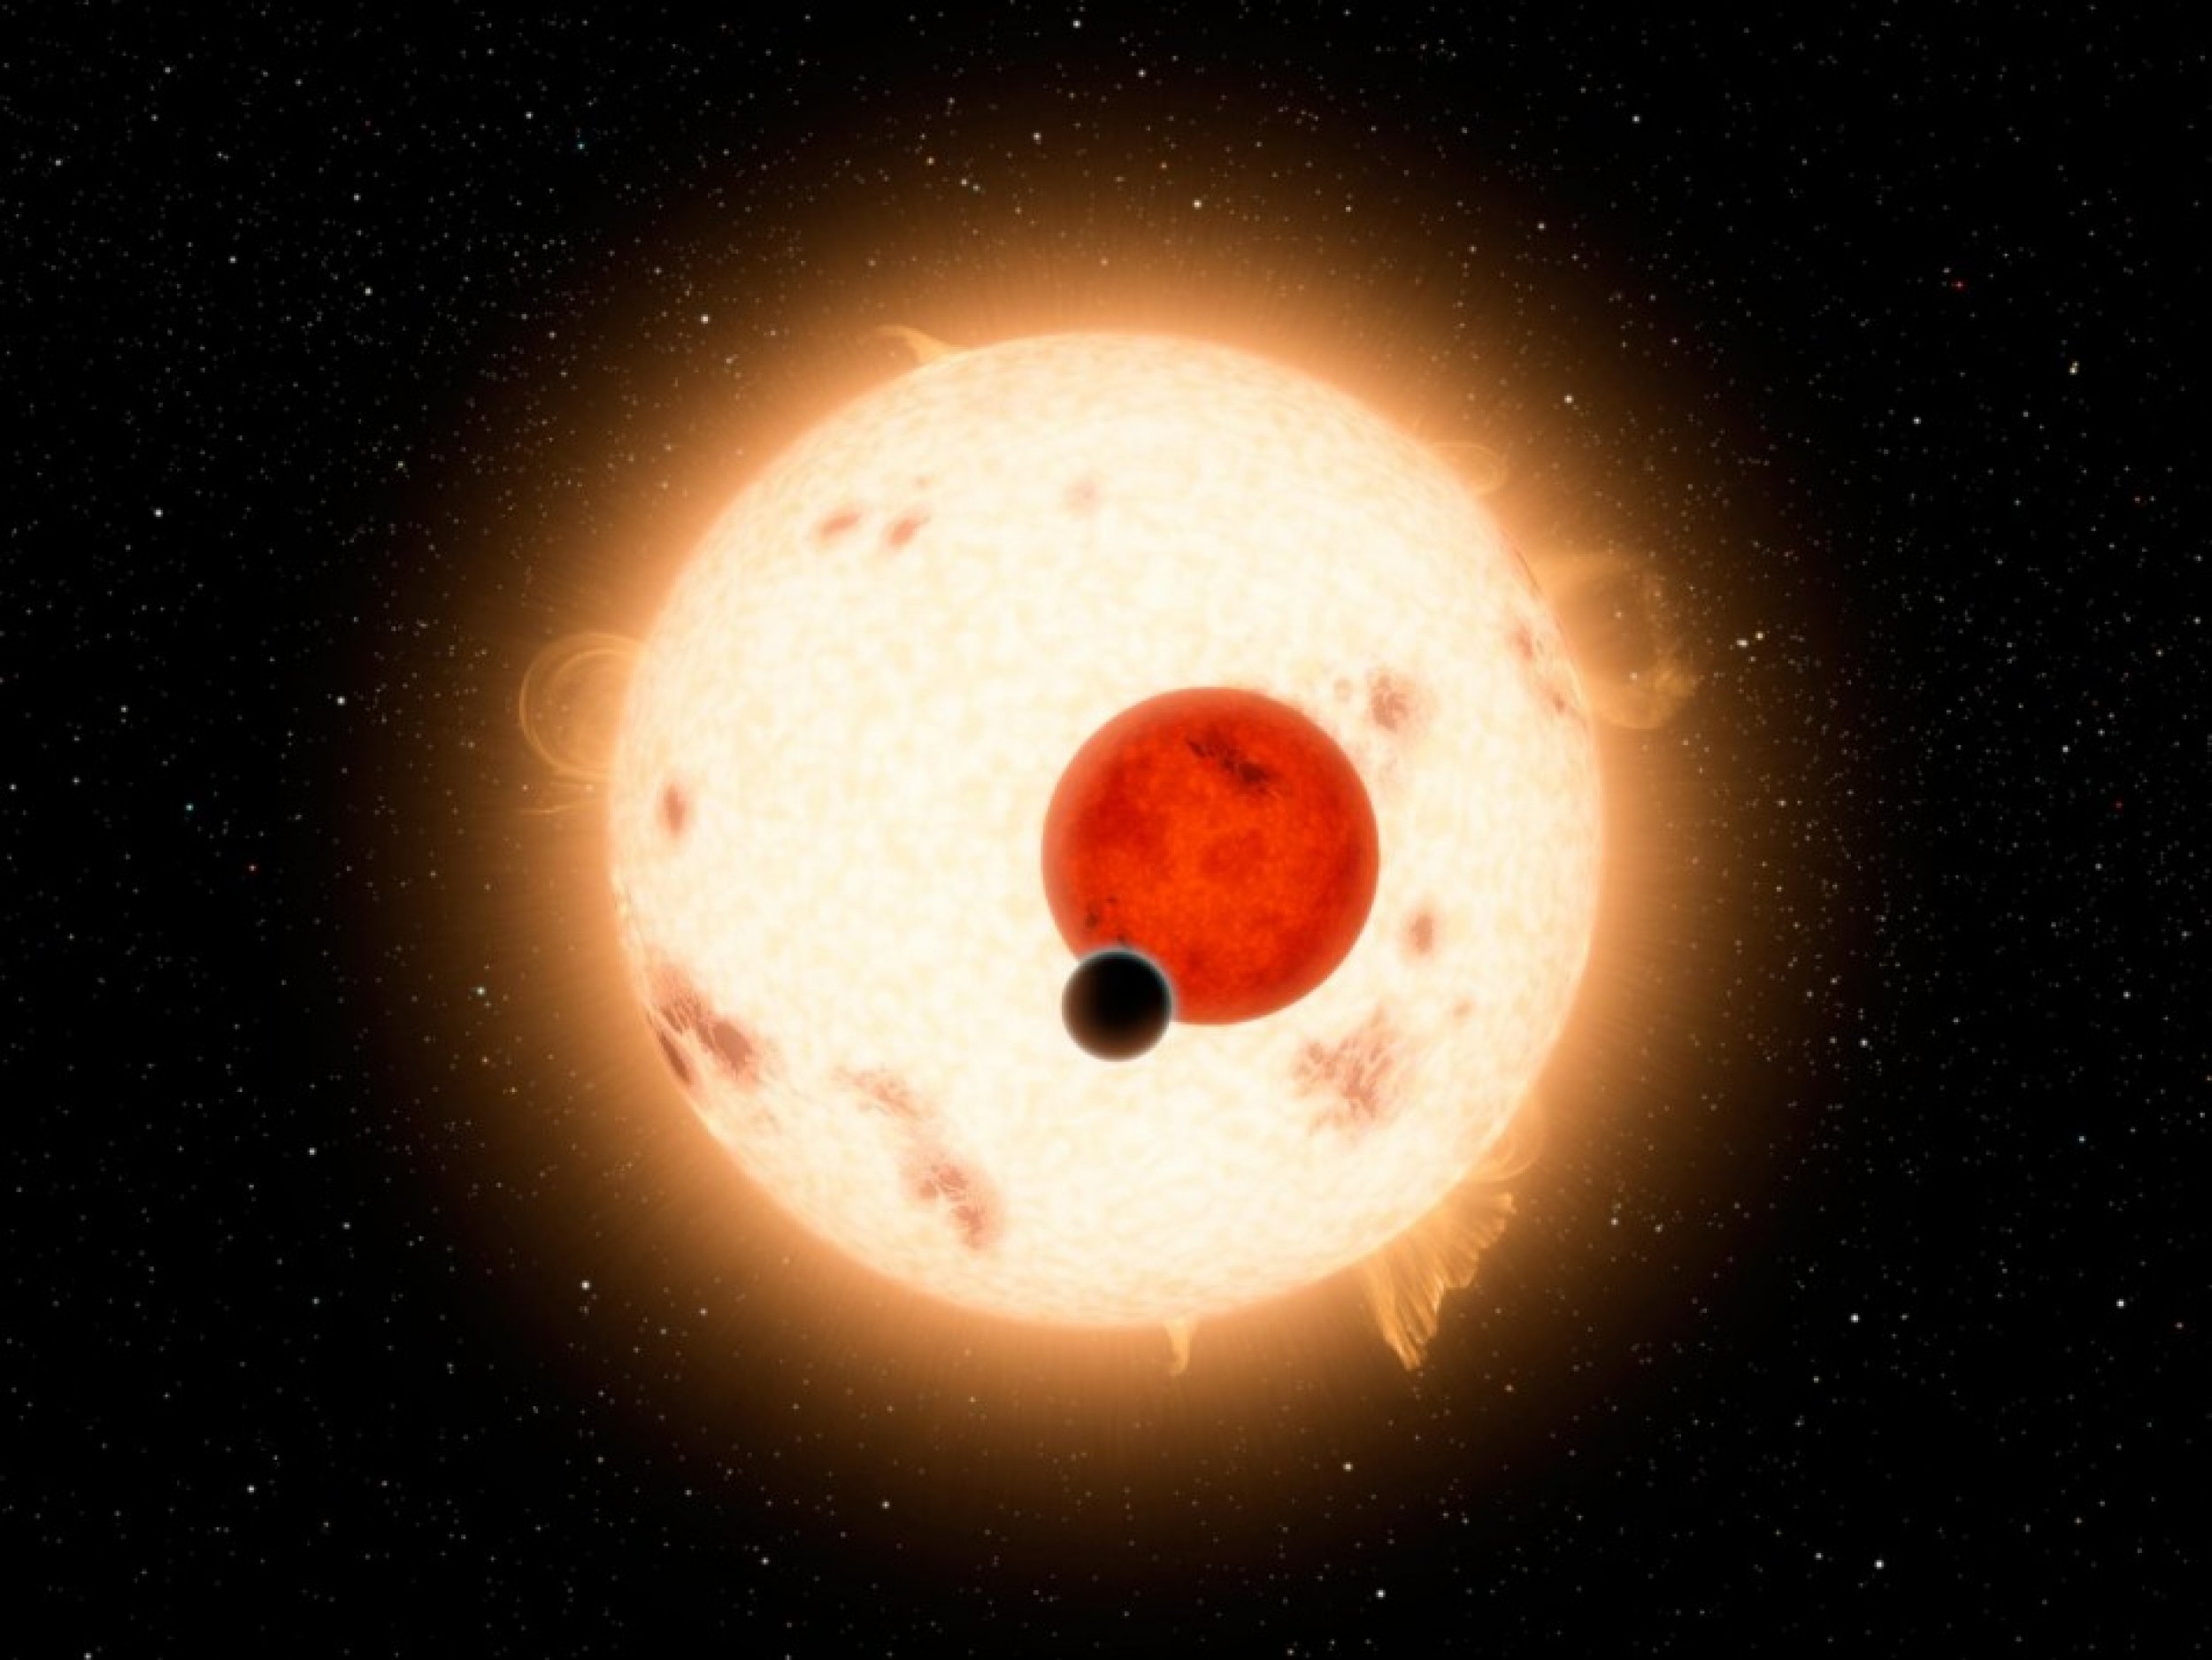 Kepler-16b George Lucas Portrayal of Double Sunset Becomes Scientific Reality